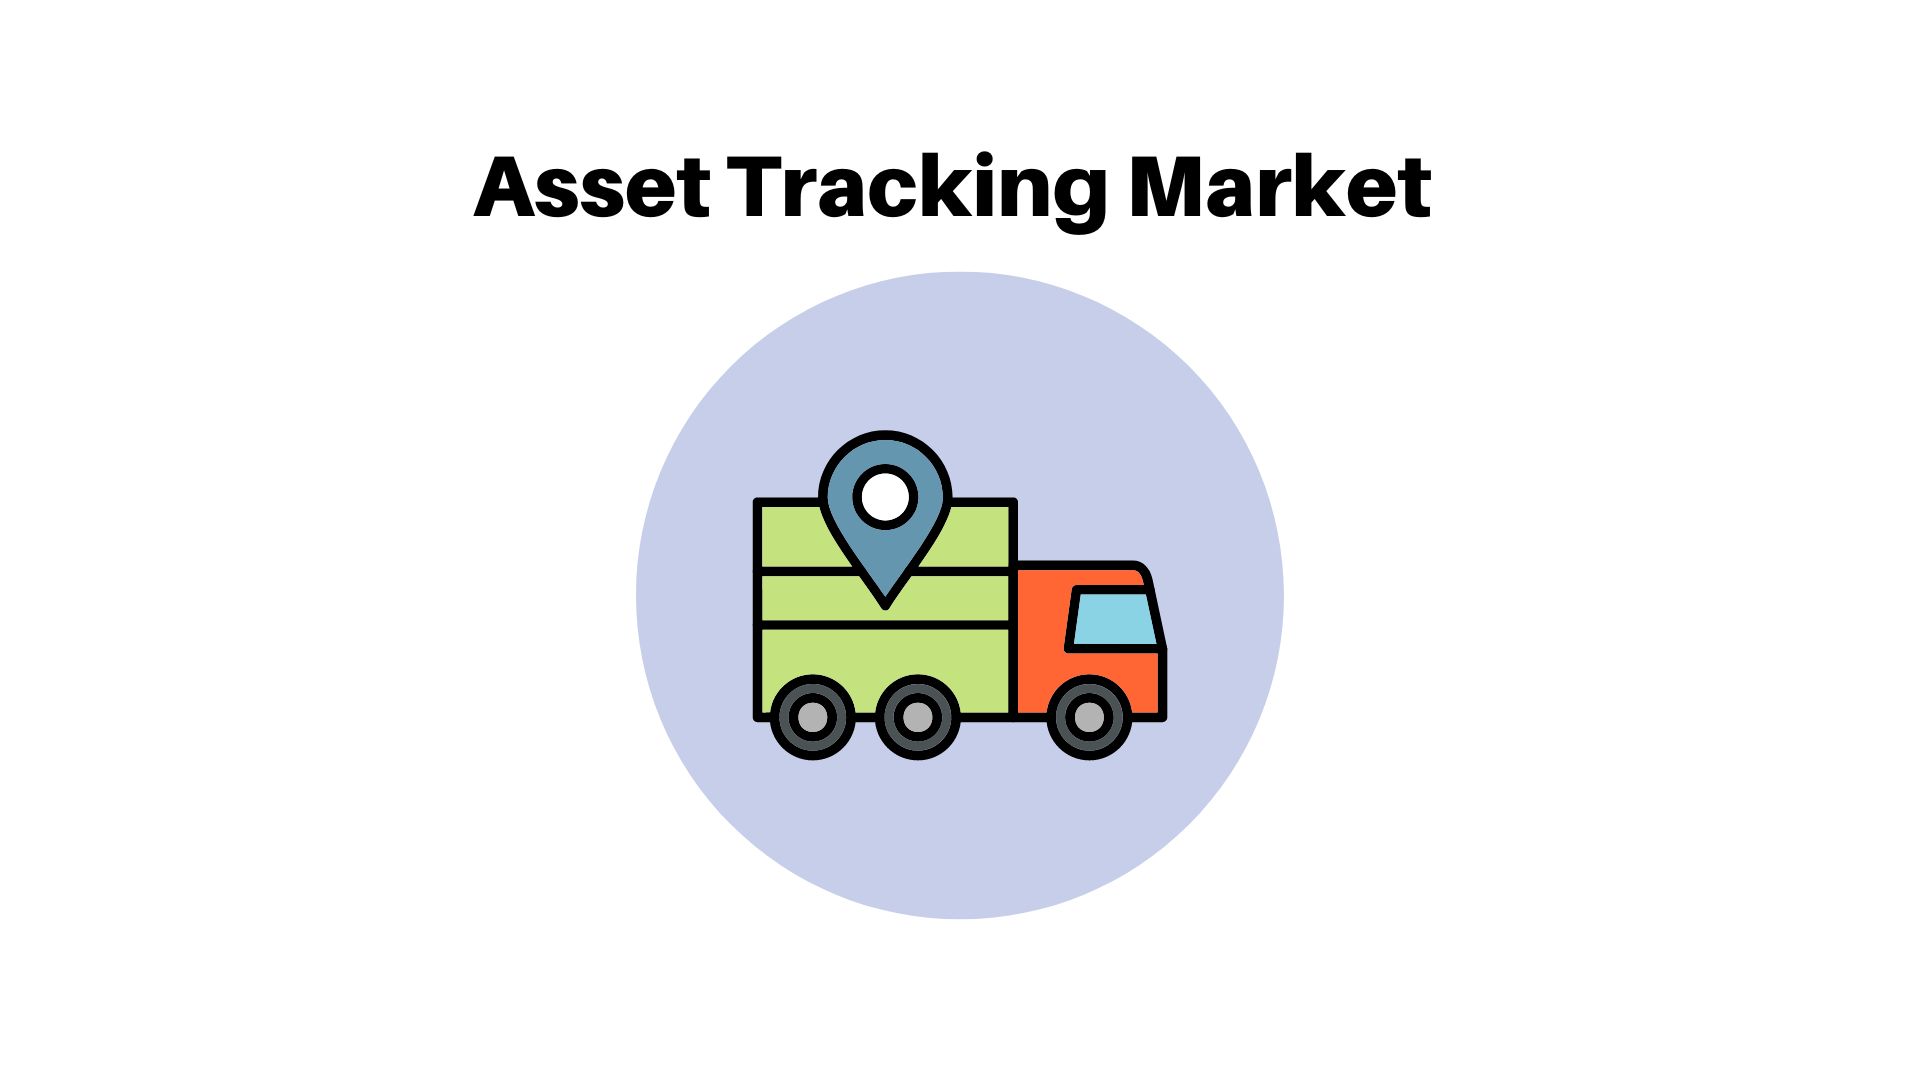 Asset Tracking Market Size USD 103.9 Bn by 2032 | at a CAGR of 16.4%